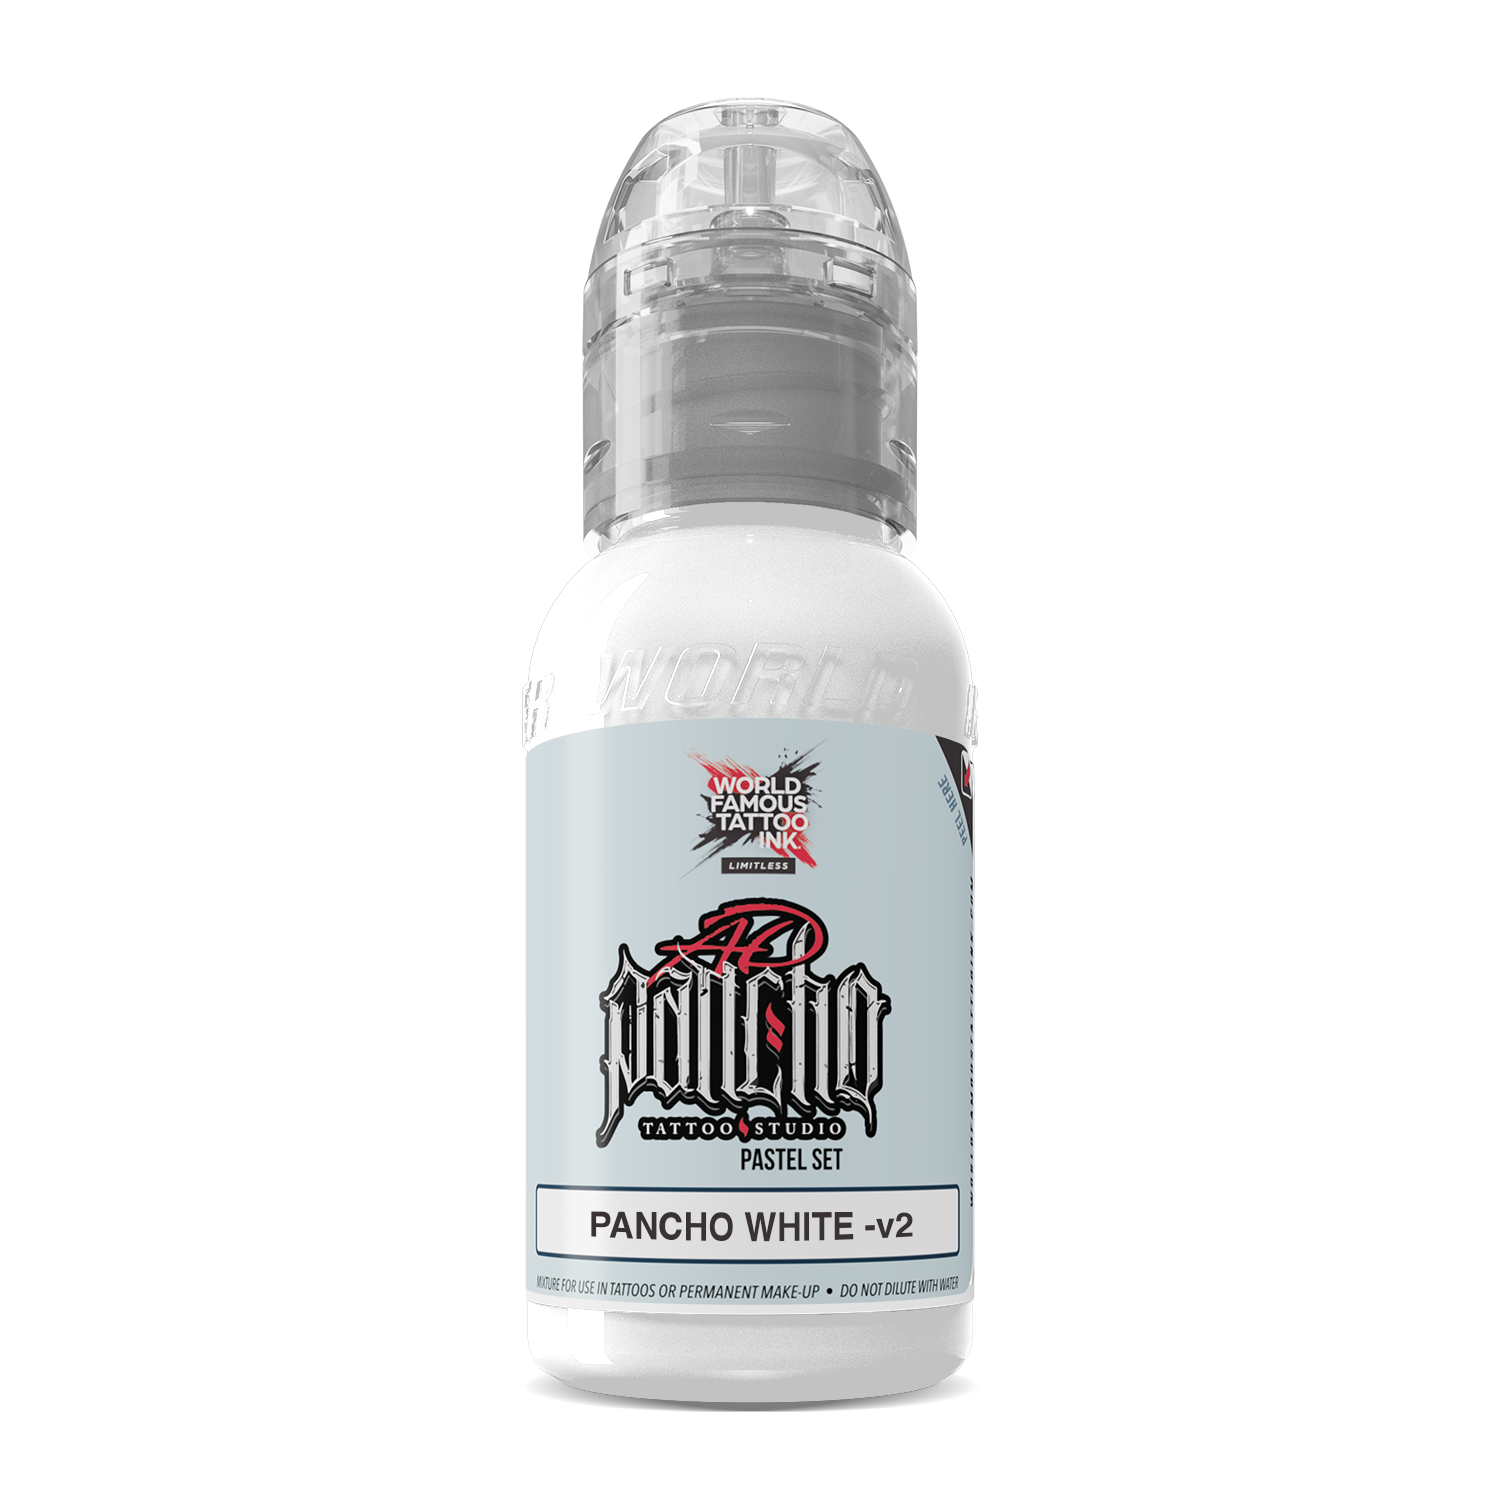 World Famous - Limitless Tattoo Ink - Pancho White v2 - 30 ml